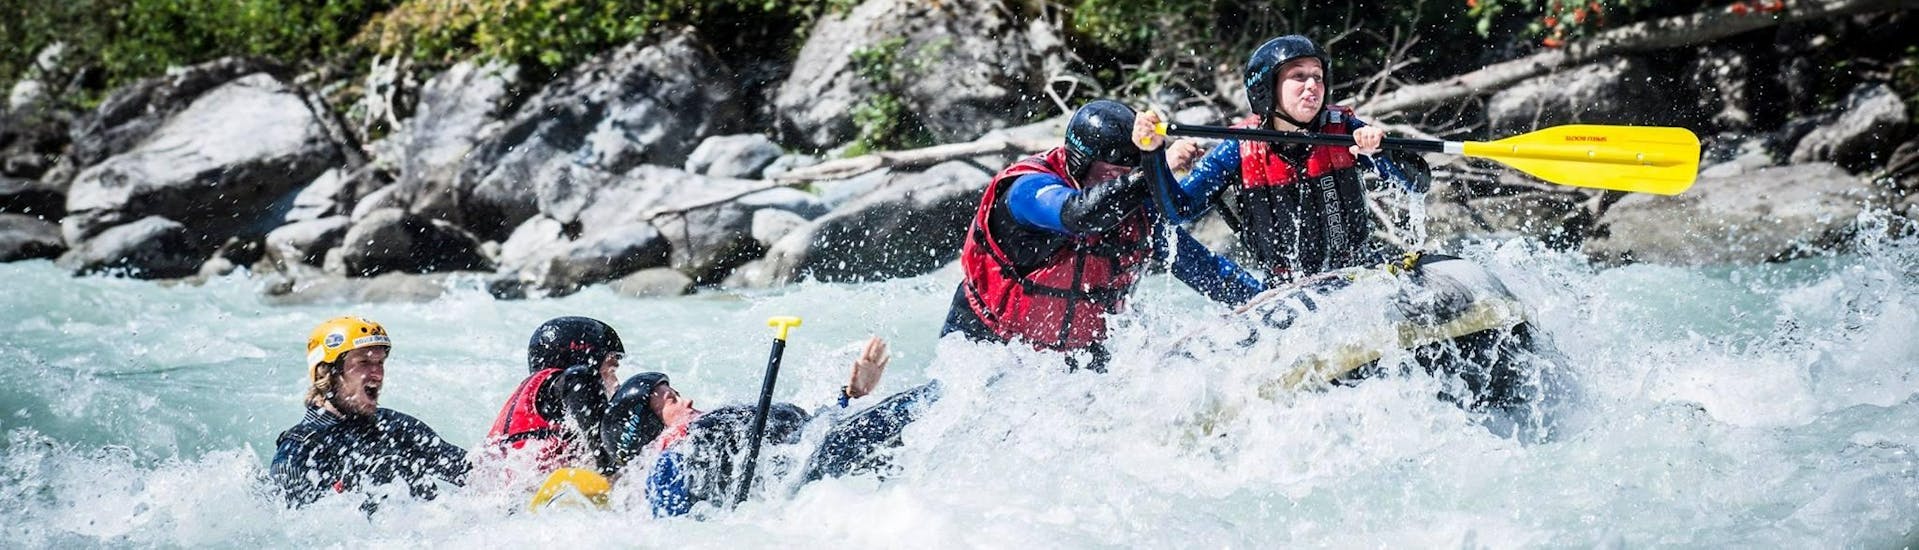 A group on a raft boat fighting the whitewater wihle X-treme Rafting on the Ötztaler Ache with H2O Adventure Ried.